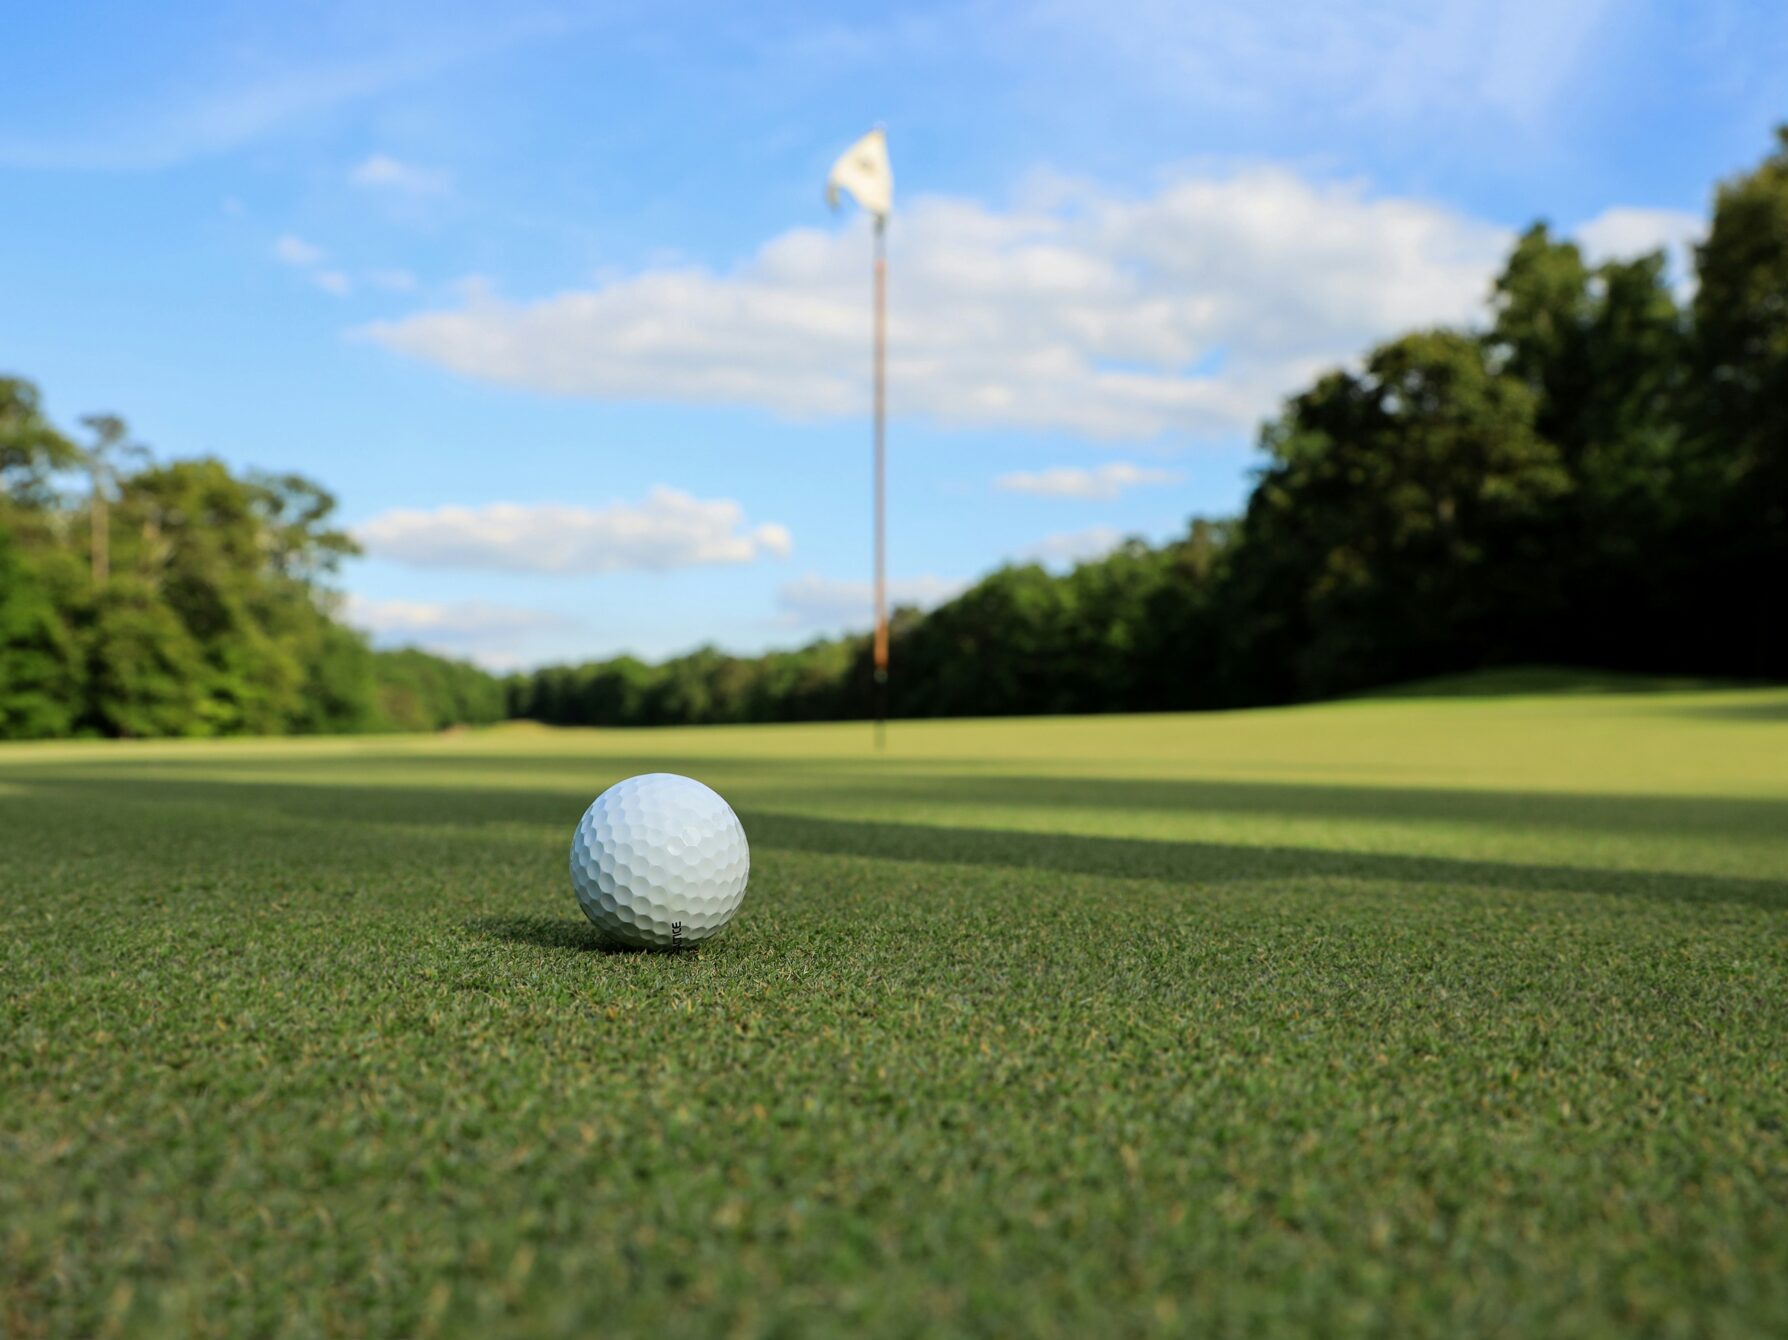 golf ball on the green with a flag in the background with trees and bluesky